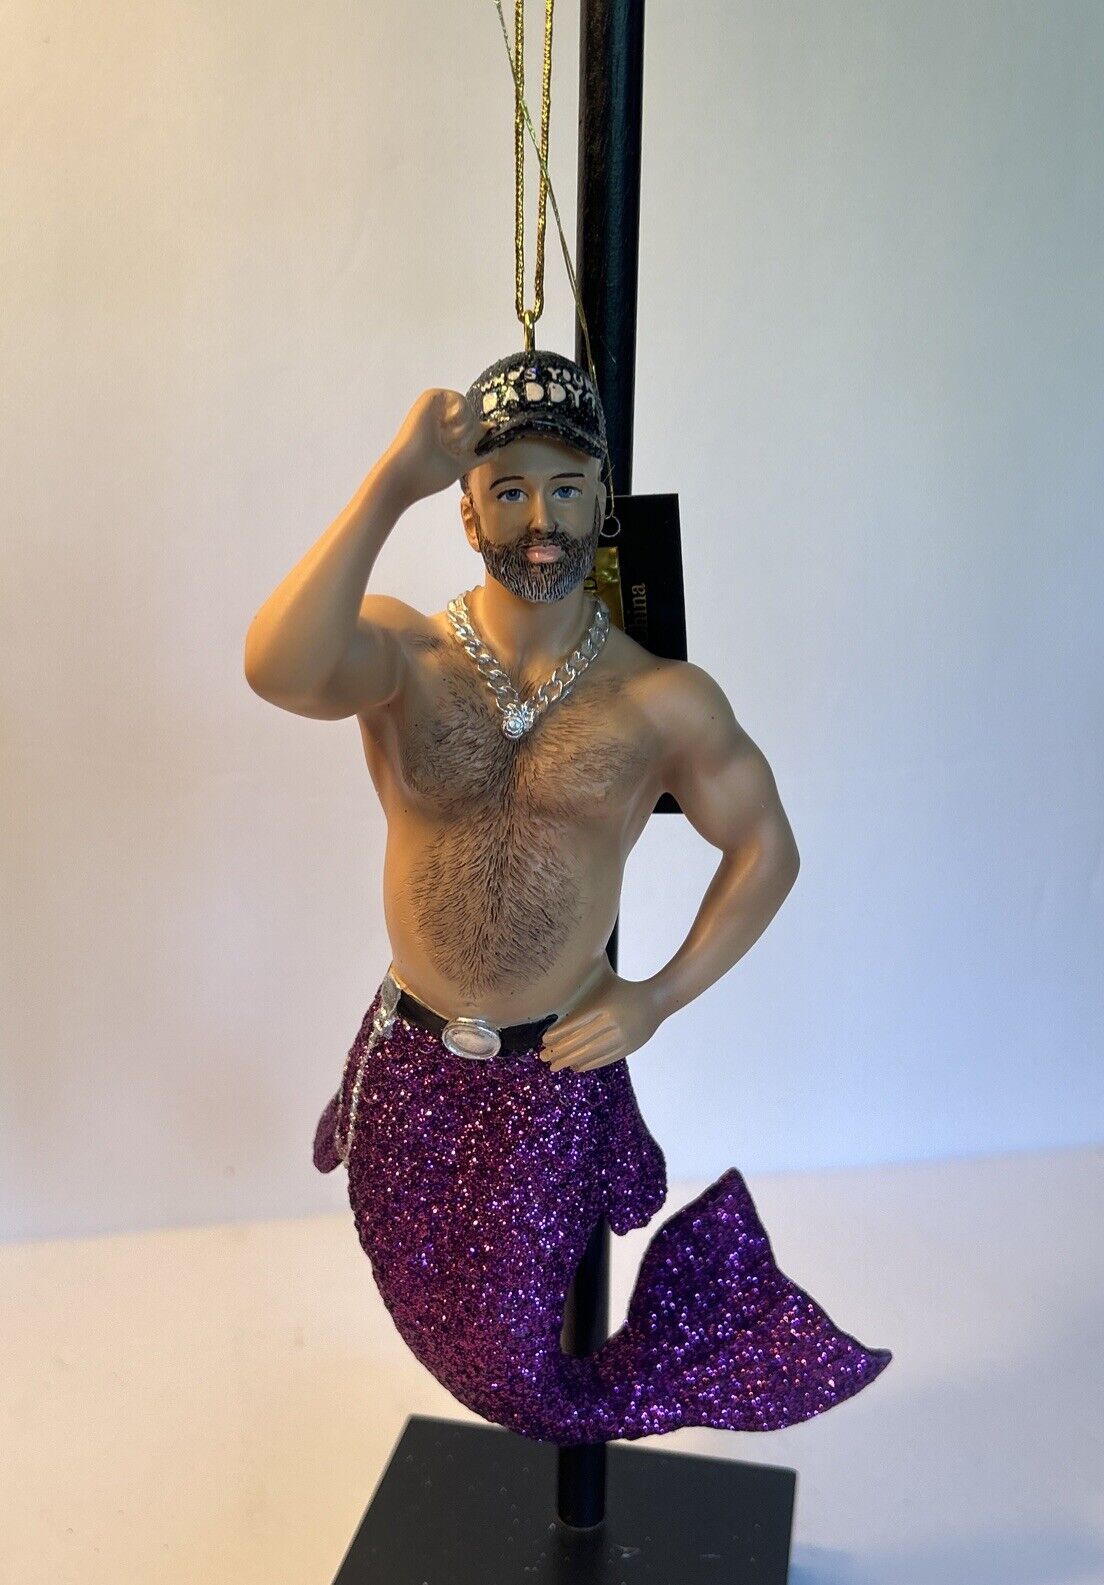 2018 December Diamonds Merman “WHO’S YOUR DADDY” Orn - NEW IN BOX